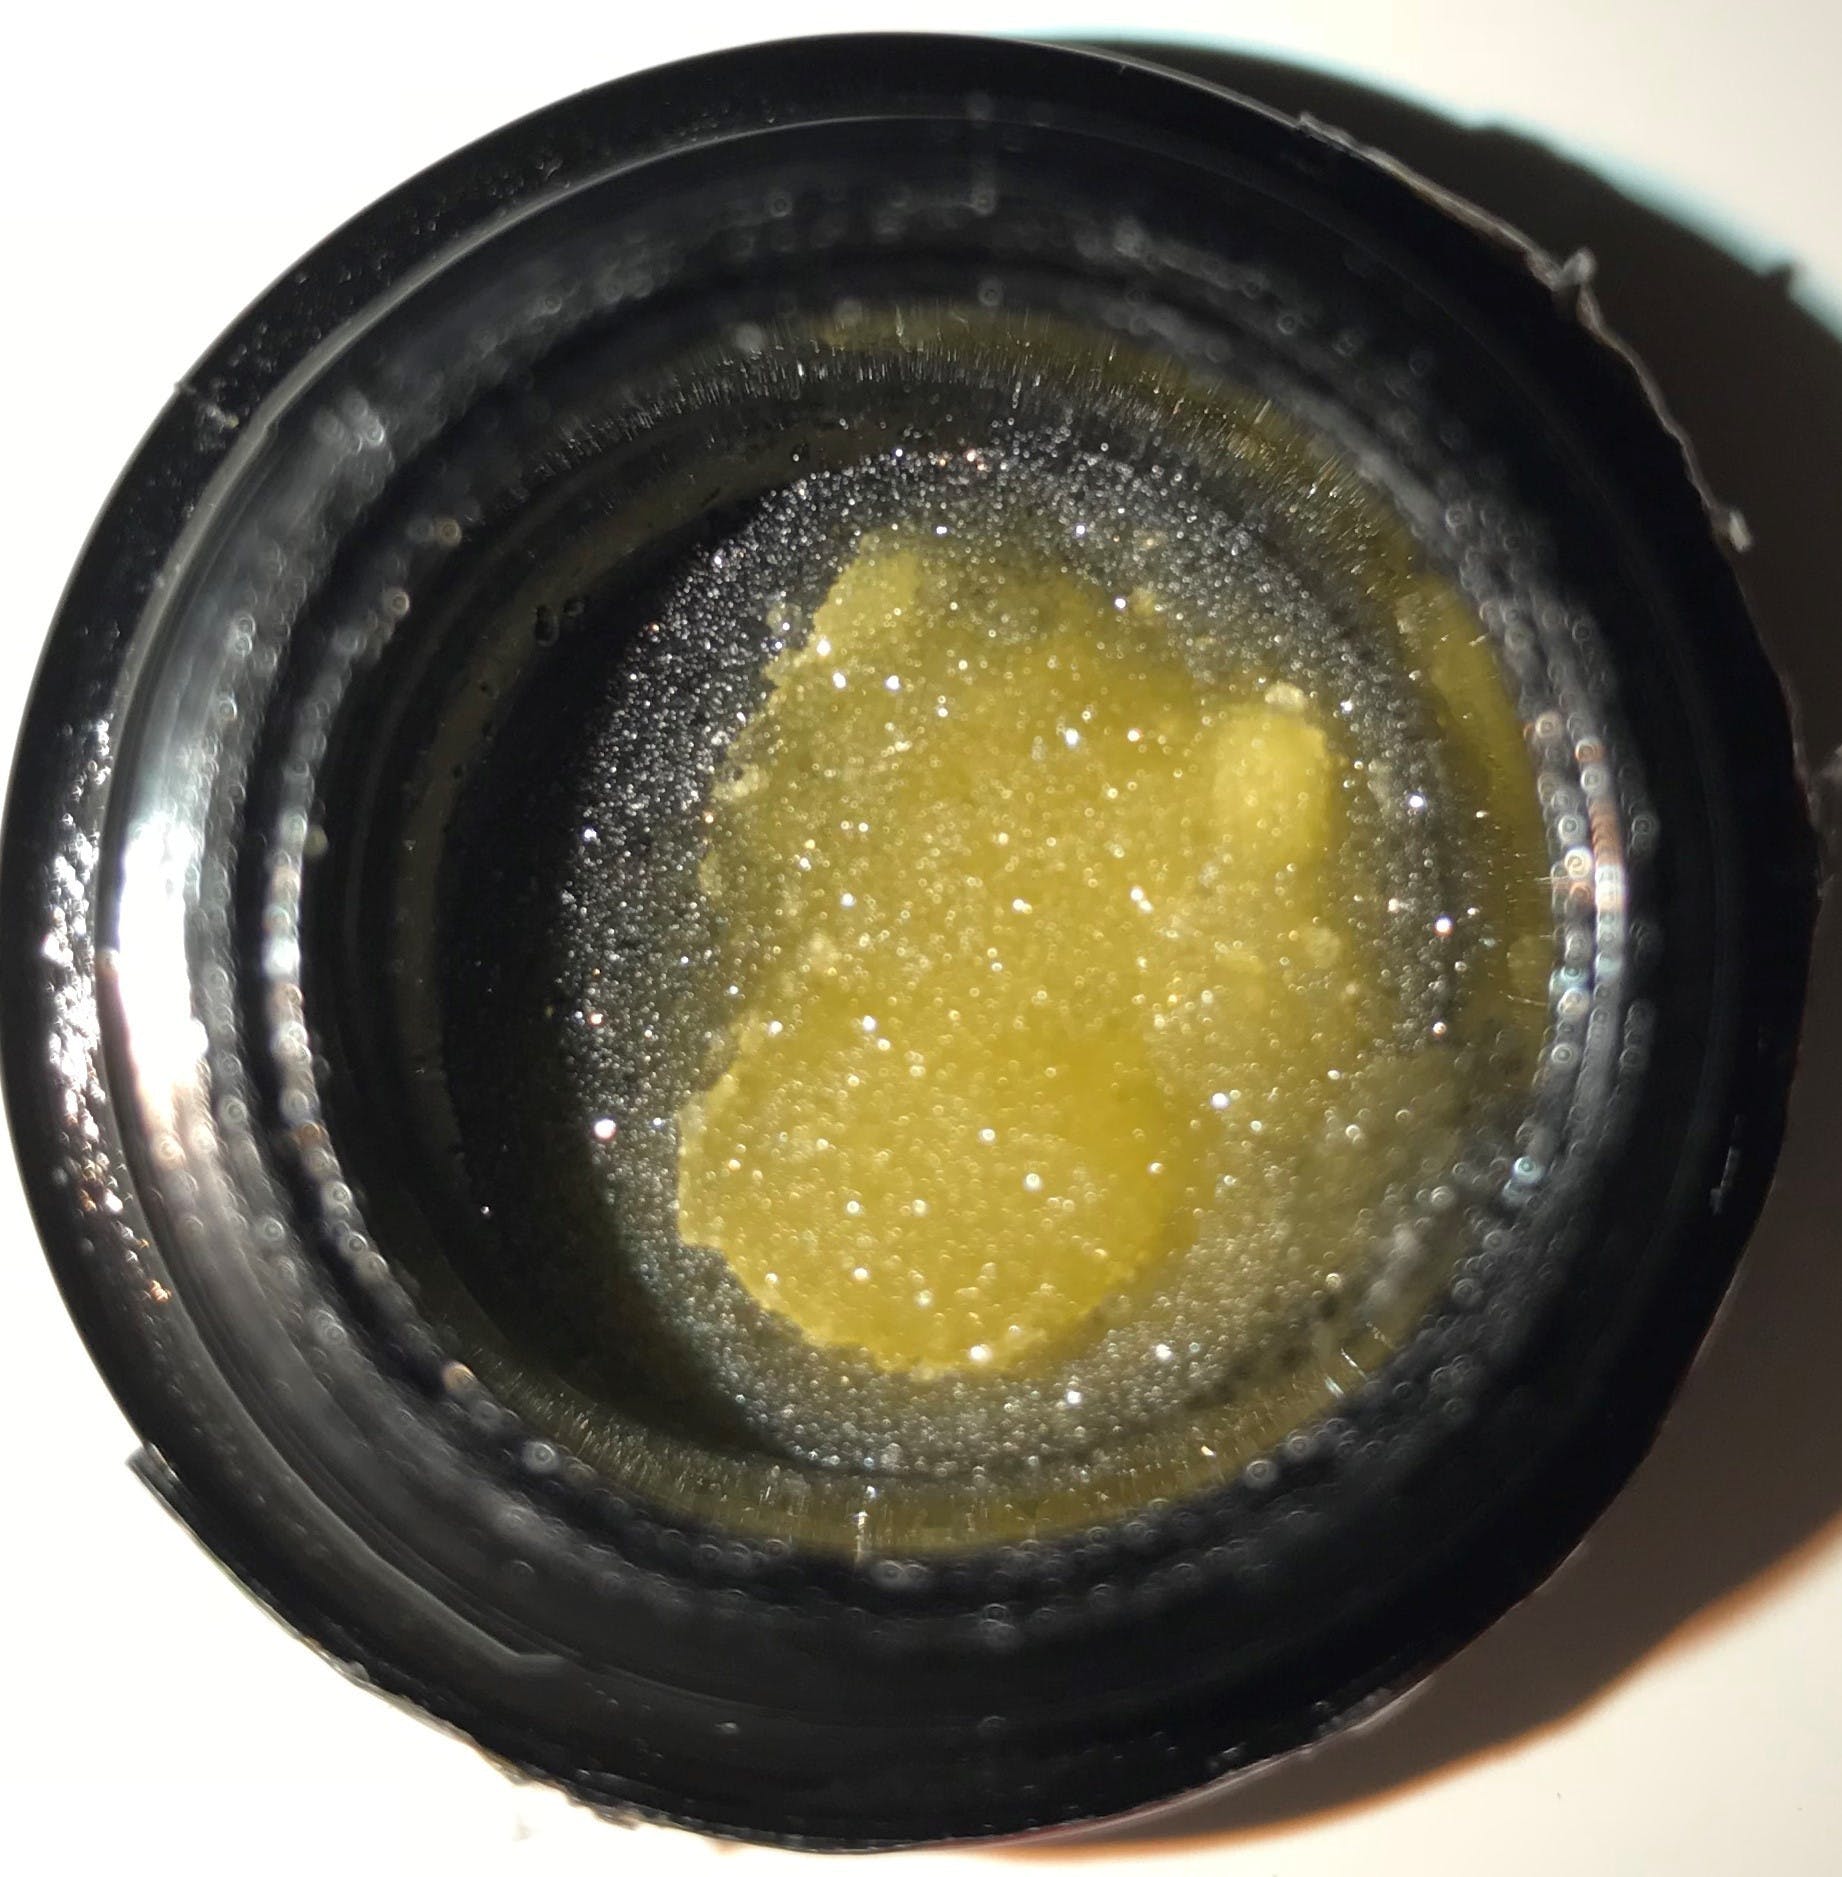 concentrate-humboldts-finest-raw-a-uncut-extracts